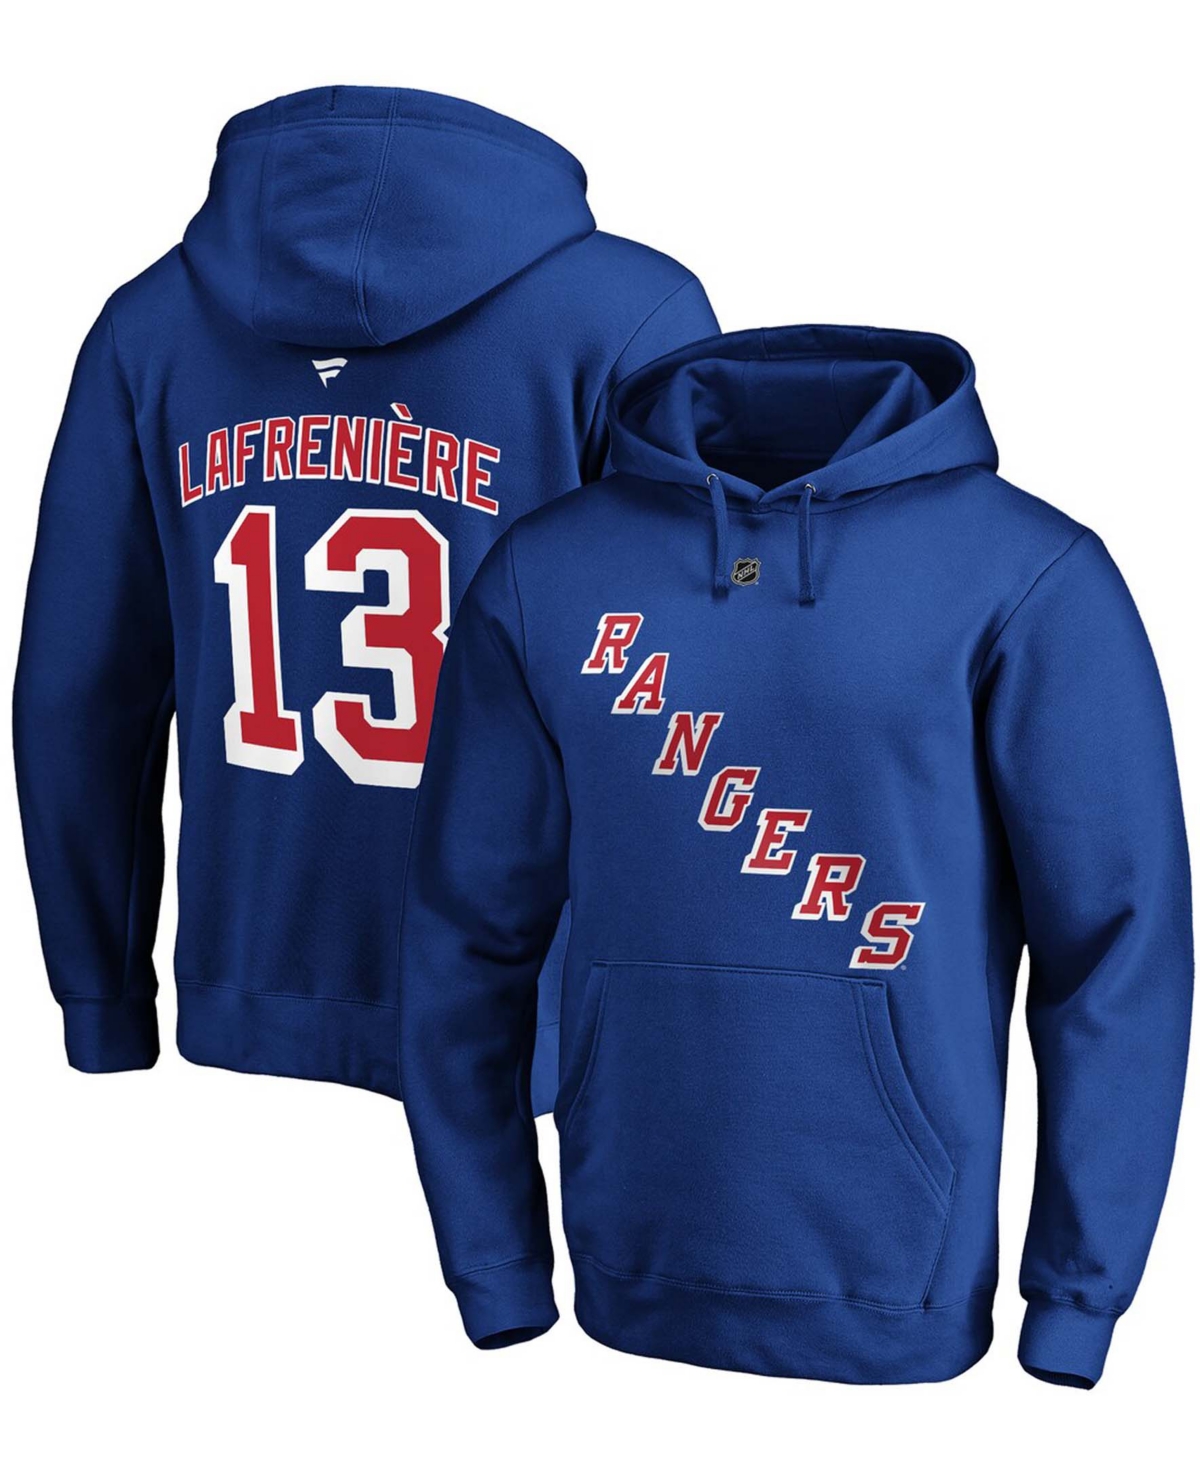 Shop Fanatics Men's Alexis Lafreniere Royal New York Rangers Authentic Stack Name And Number Pullover Hoodie